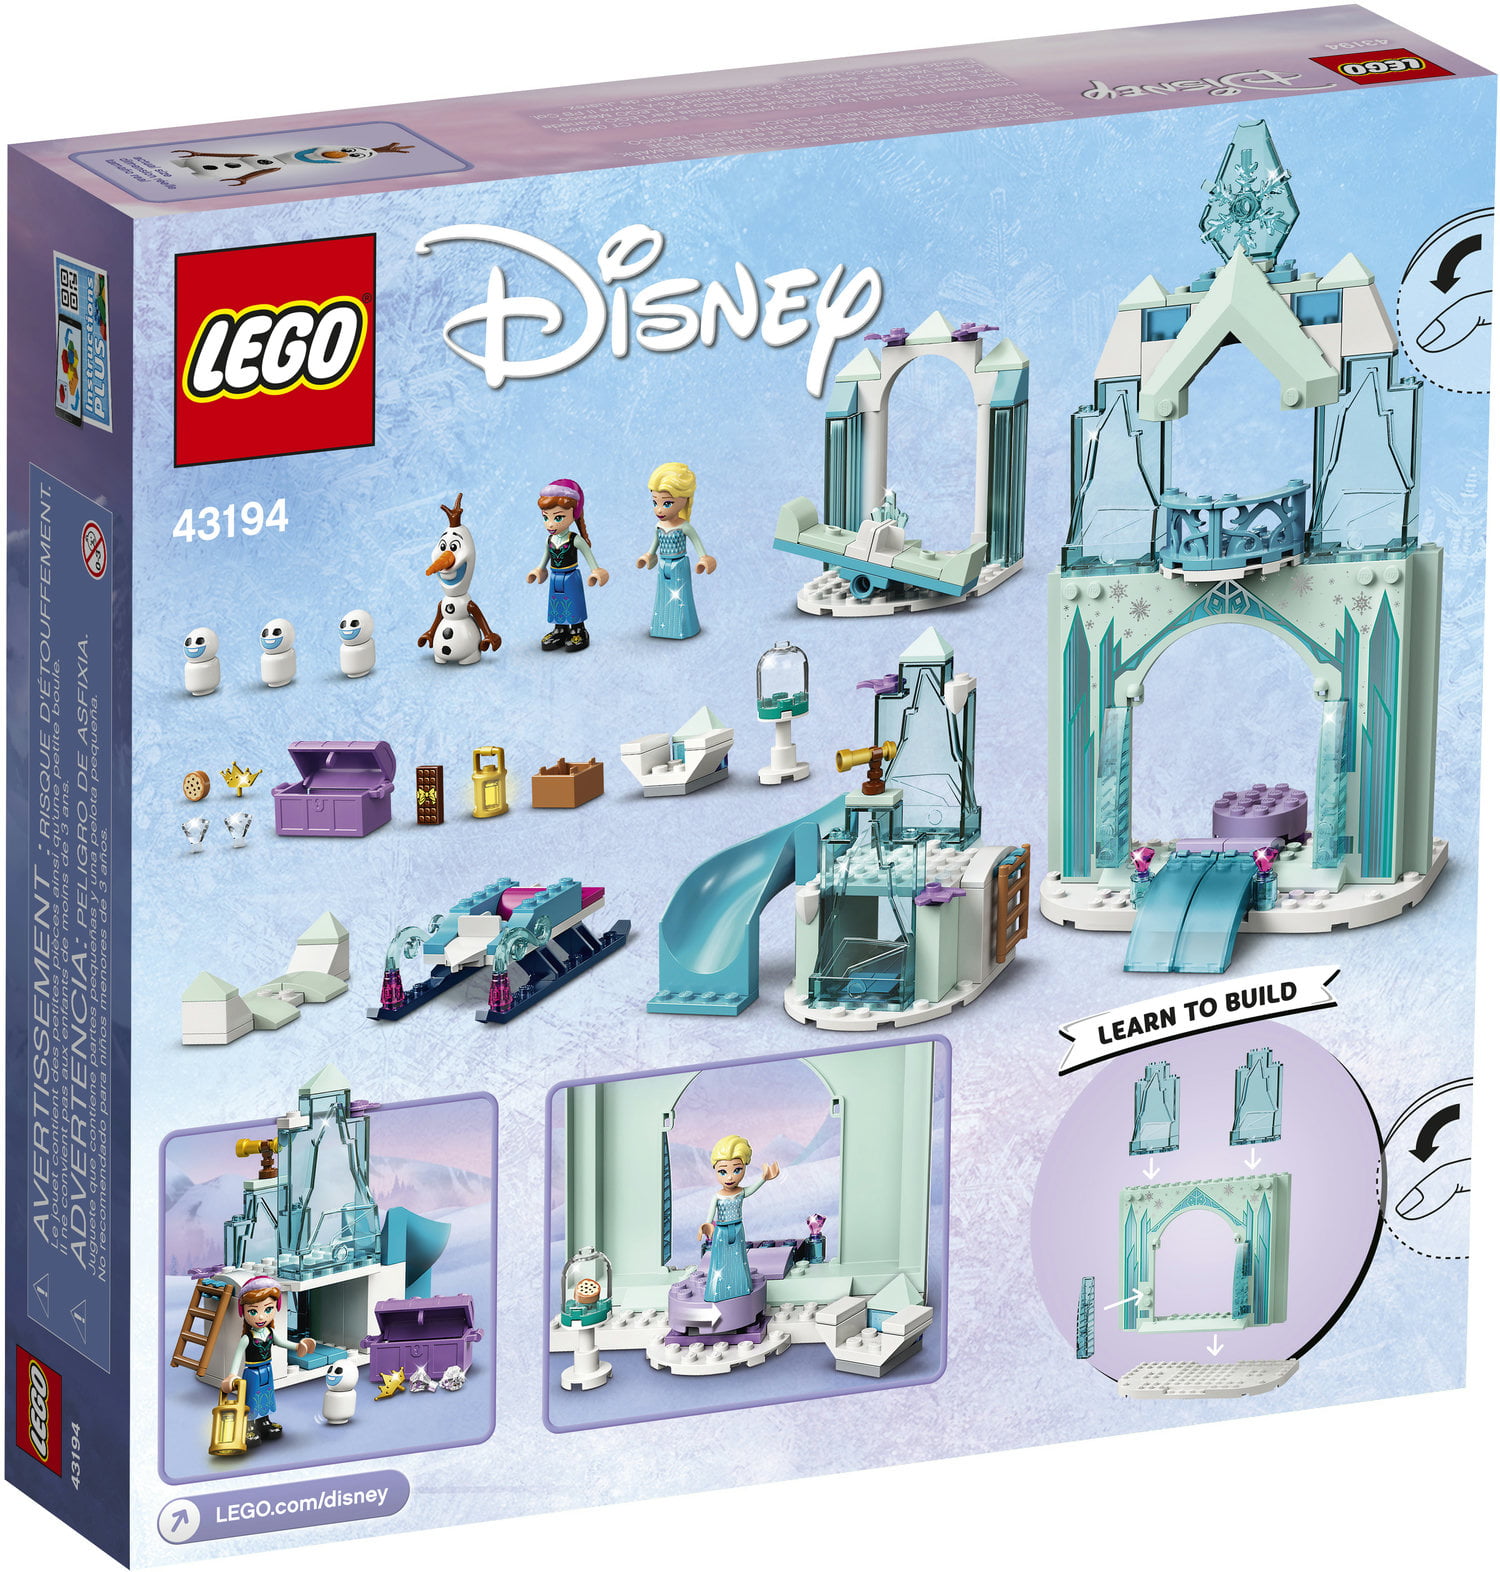 154 Pieces LEGO Disney Anna and Elsa’s Frozen Wonderland 43194 Building Kit; A Cool Construction Toy That Boosts Creative Fun; New 2021 